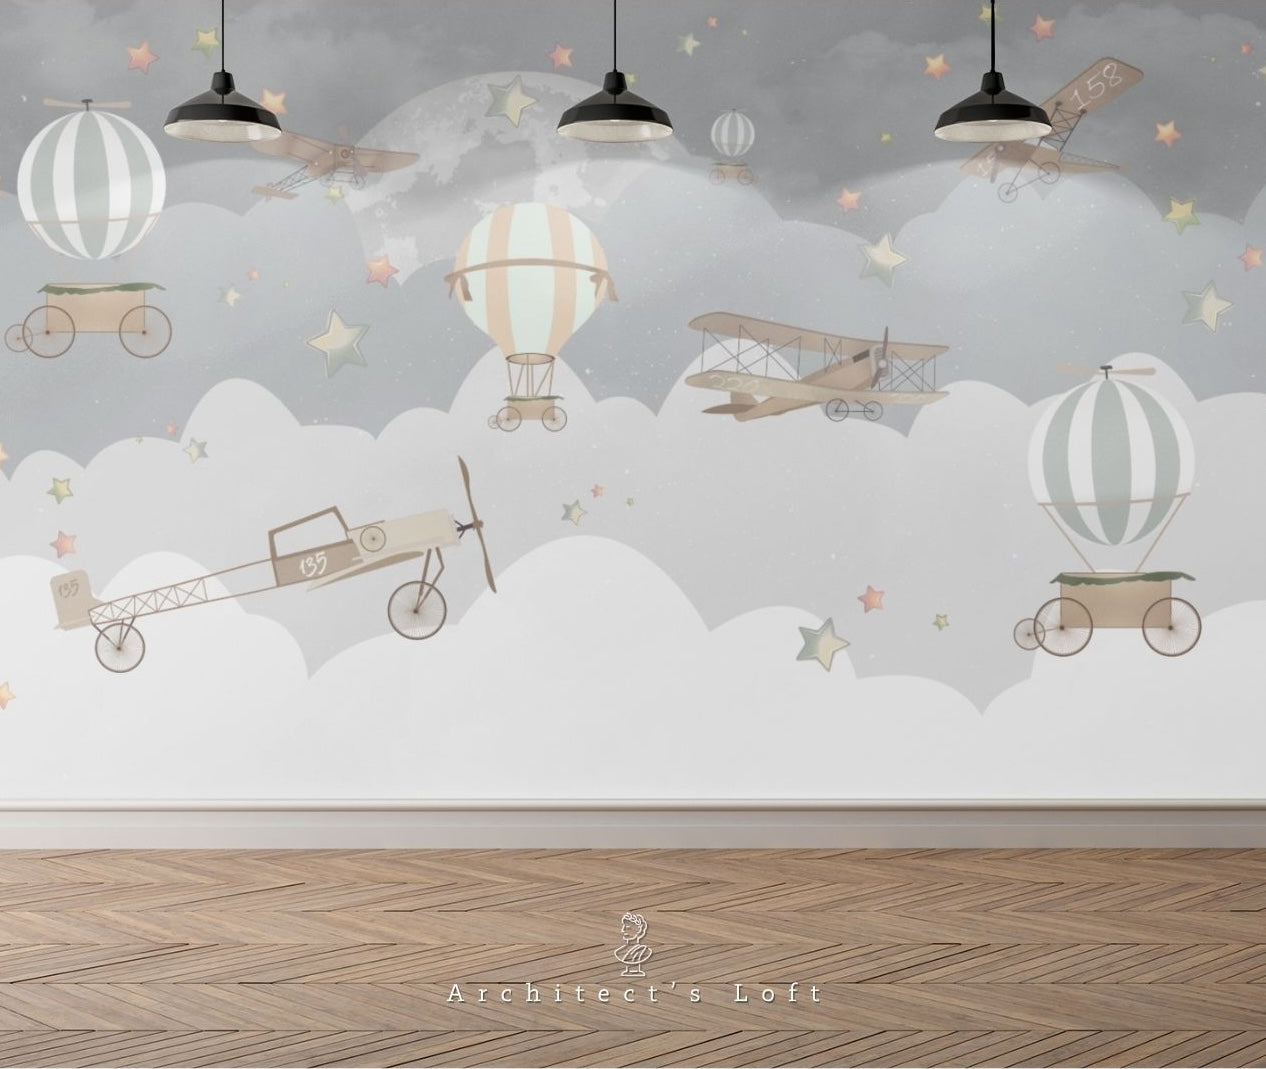 Balloons and Planes Nursery Wallpaper